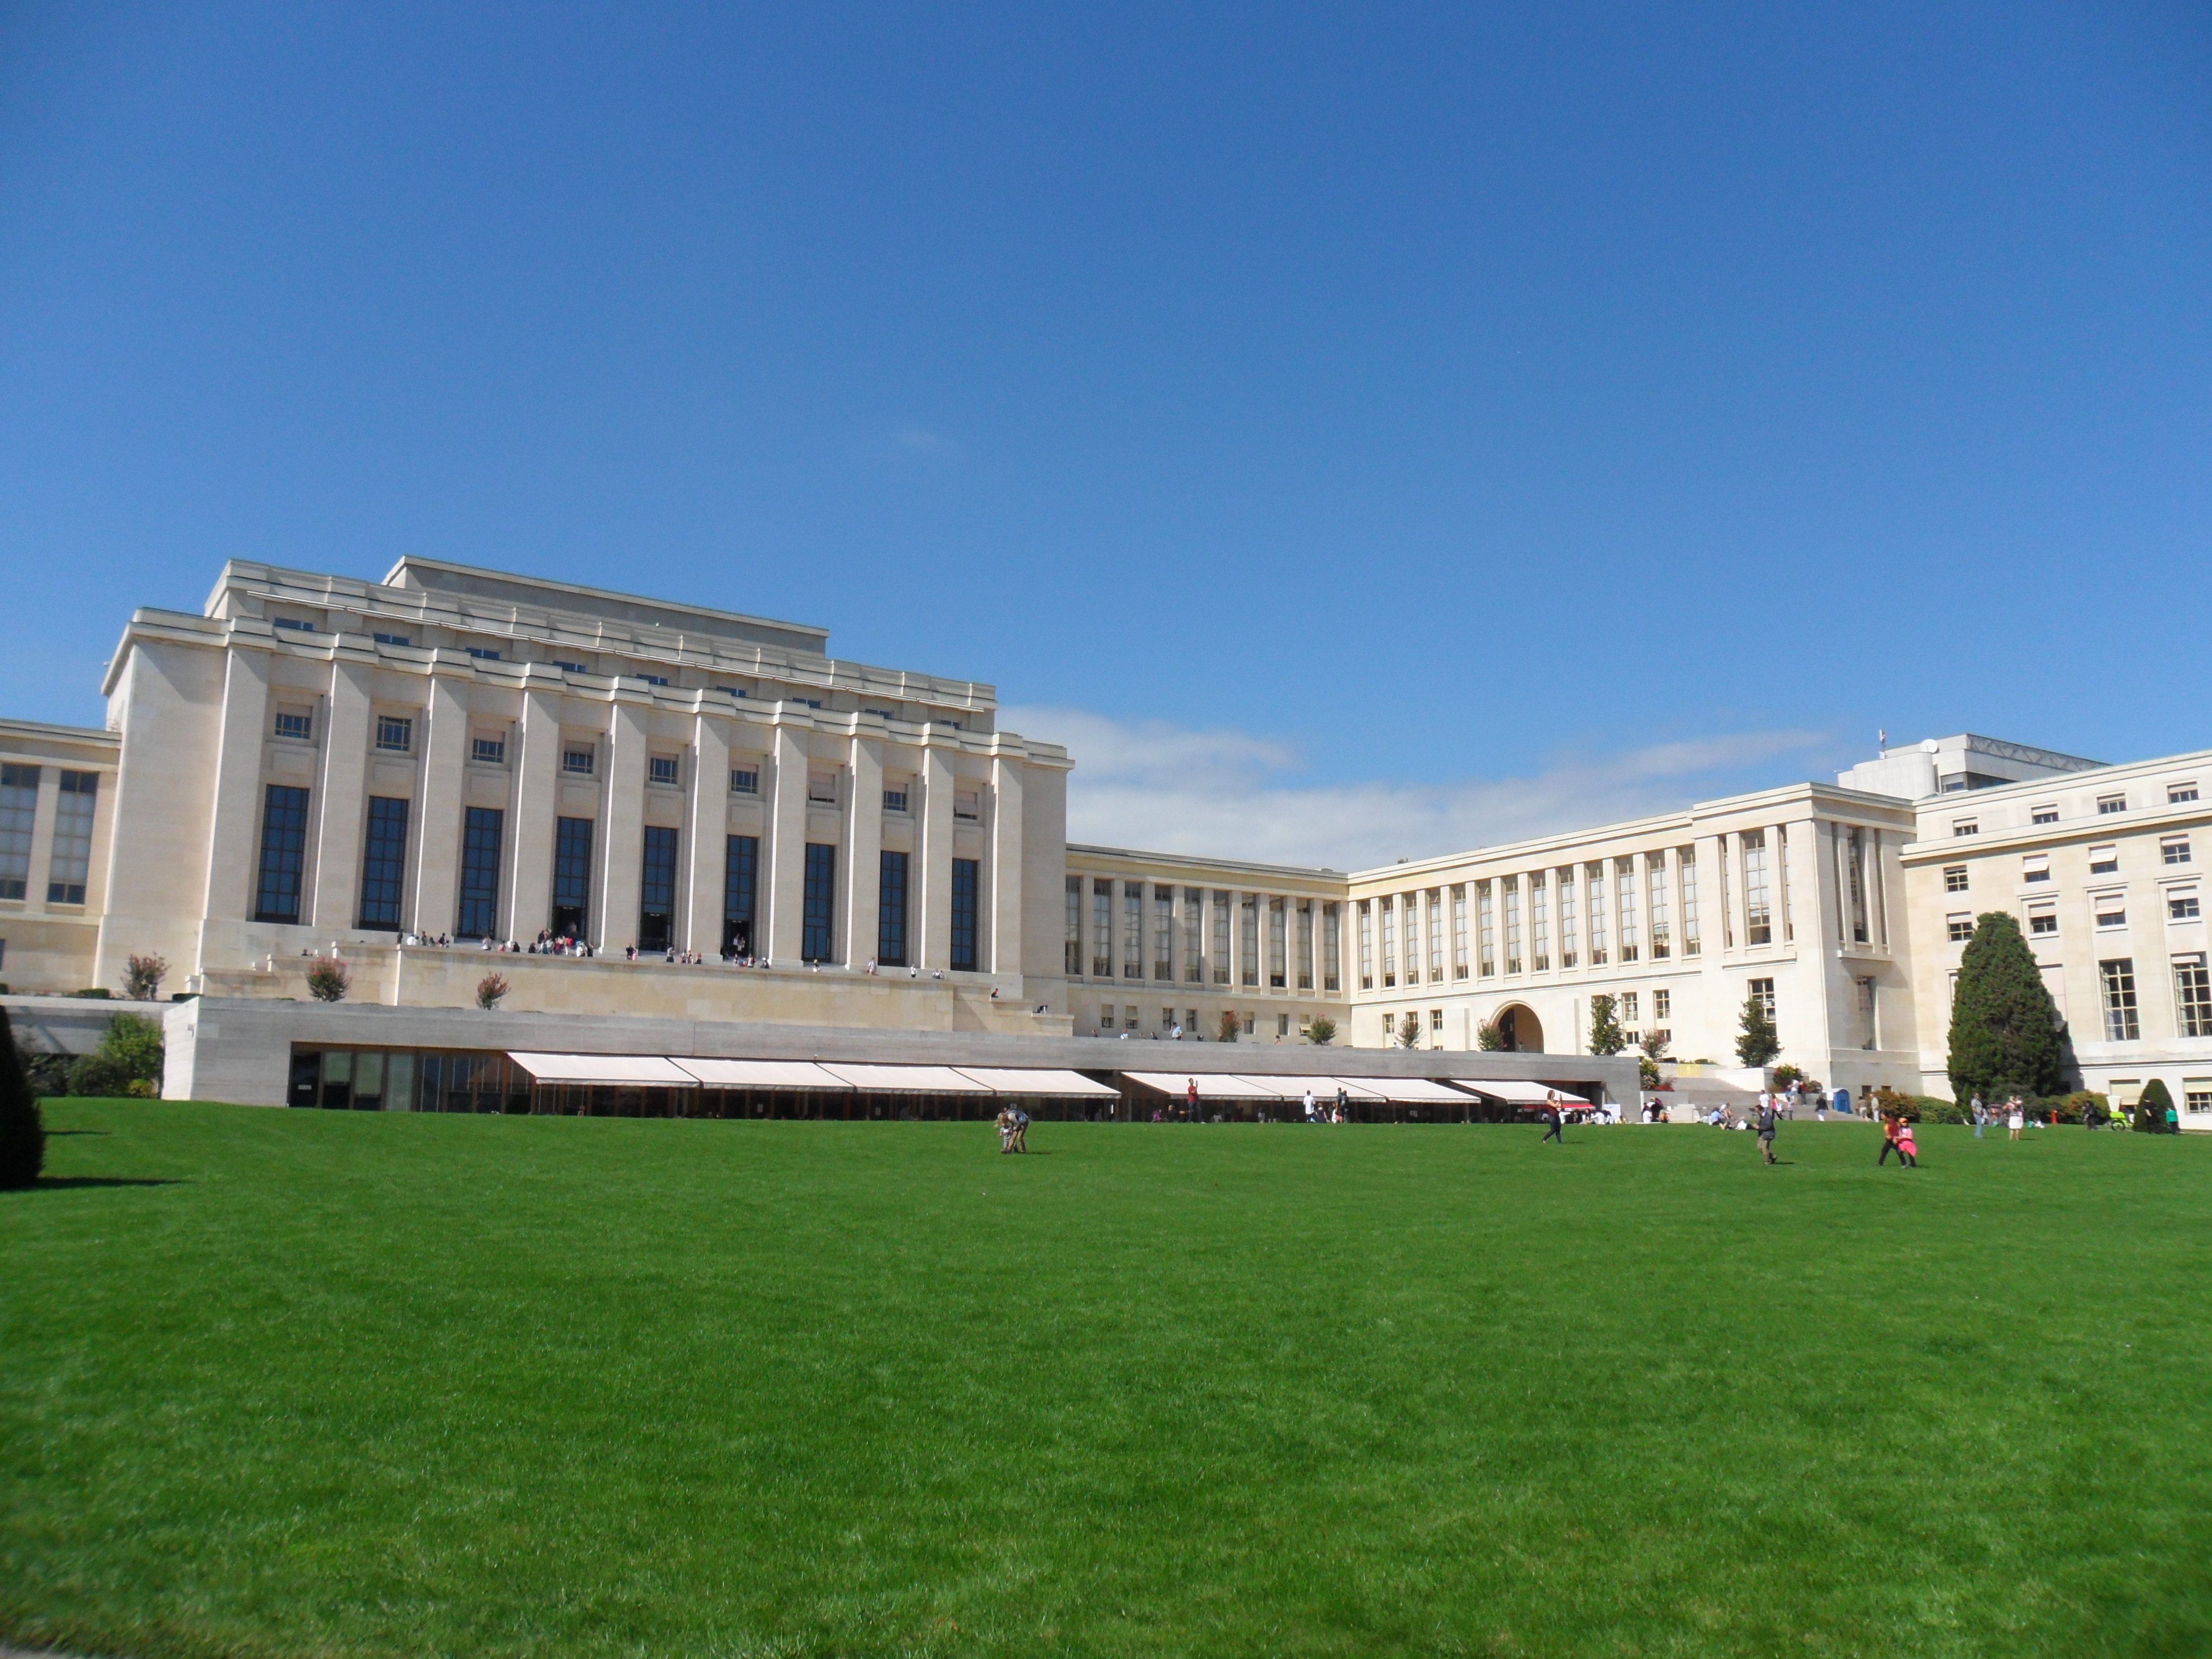 Building A of the Palace of Nations, housong the United Nations Office at Geneva, seen from the park (south). Photo taken on September 15, 2012.